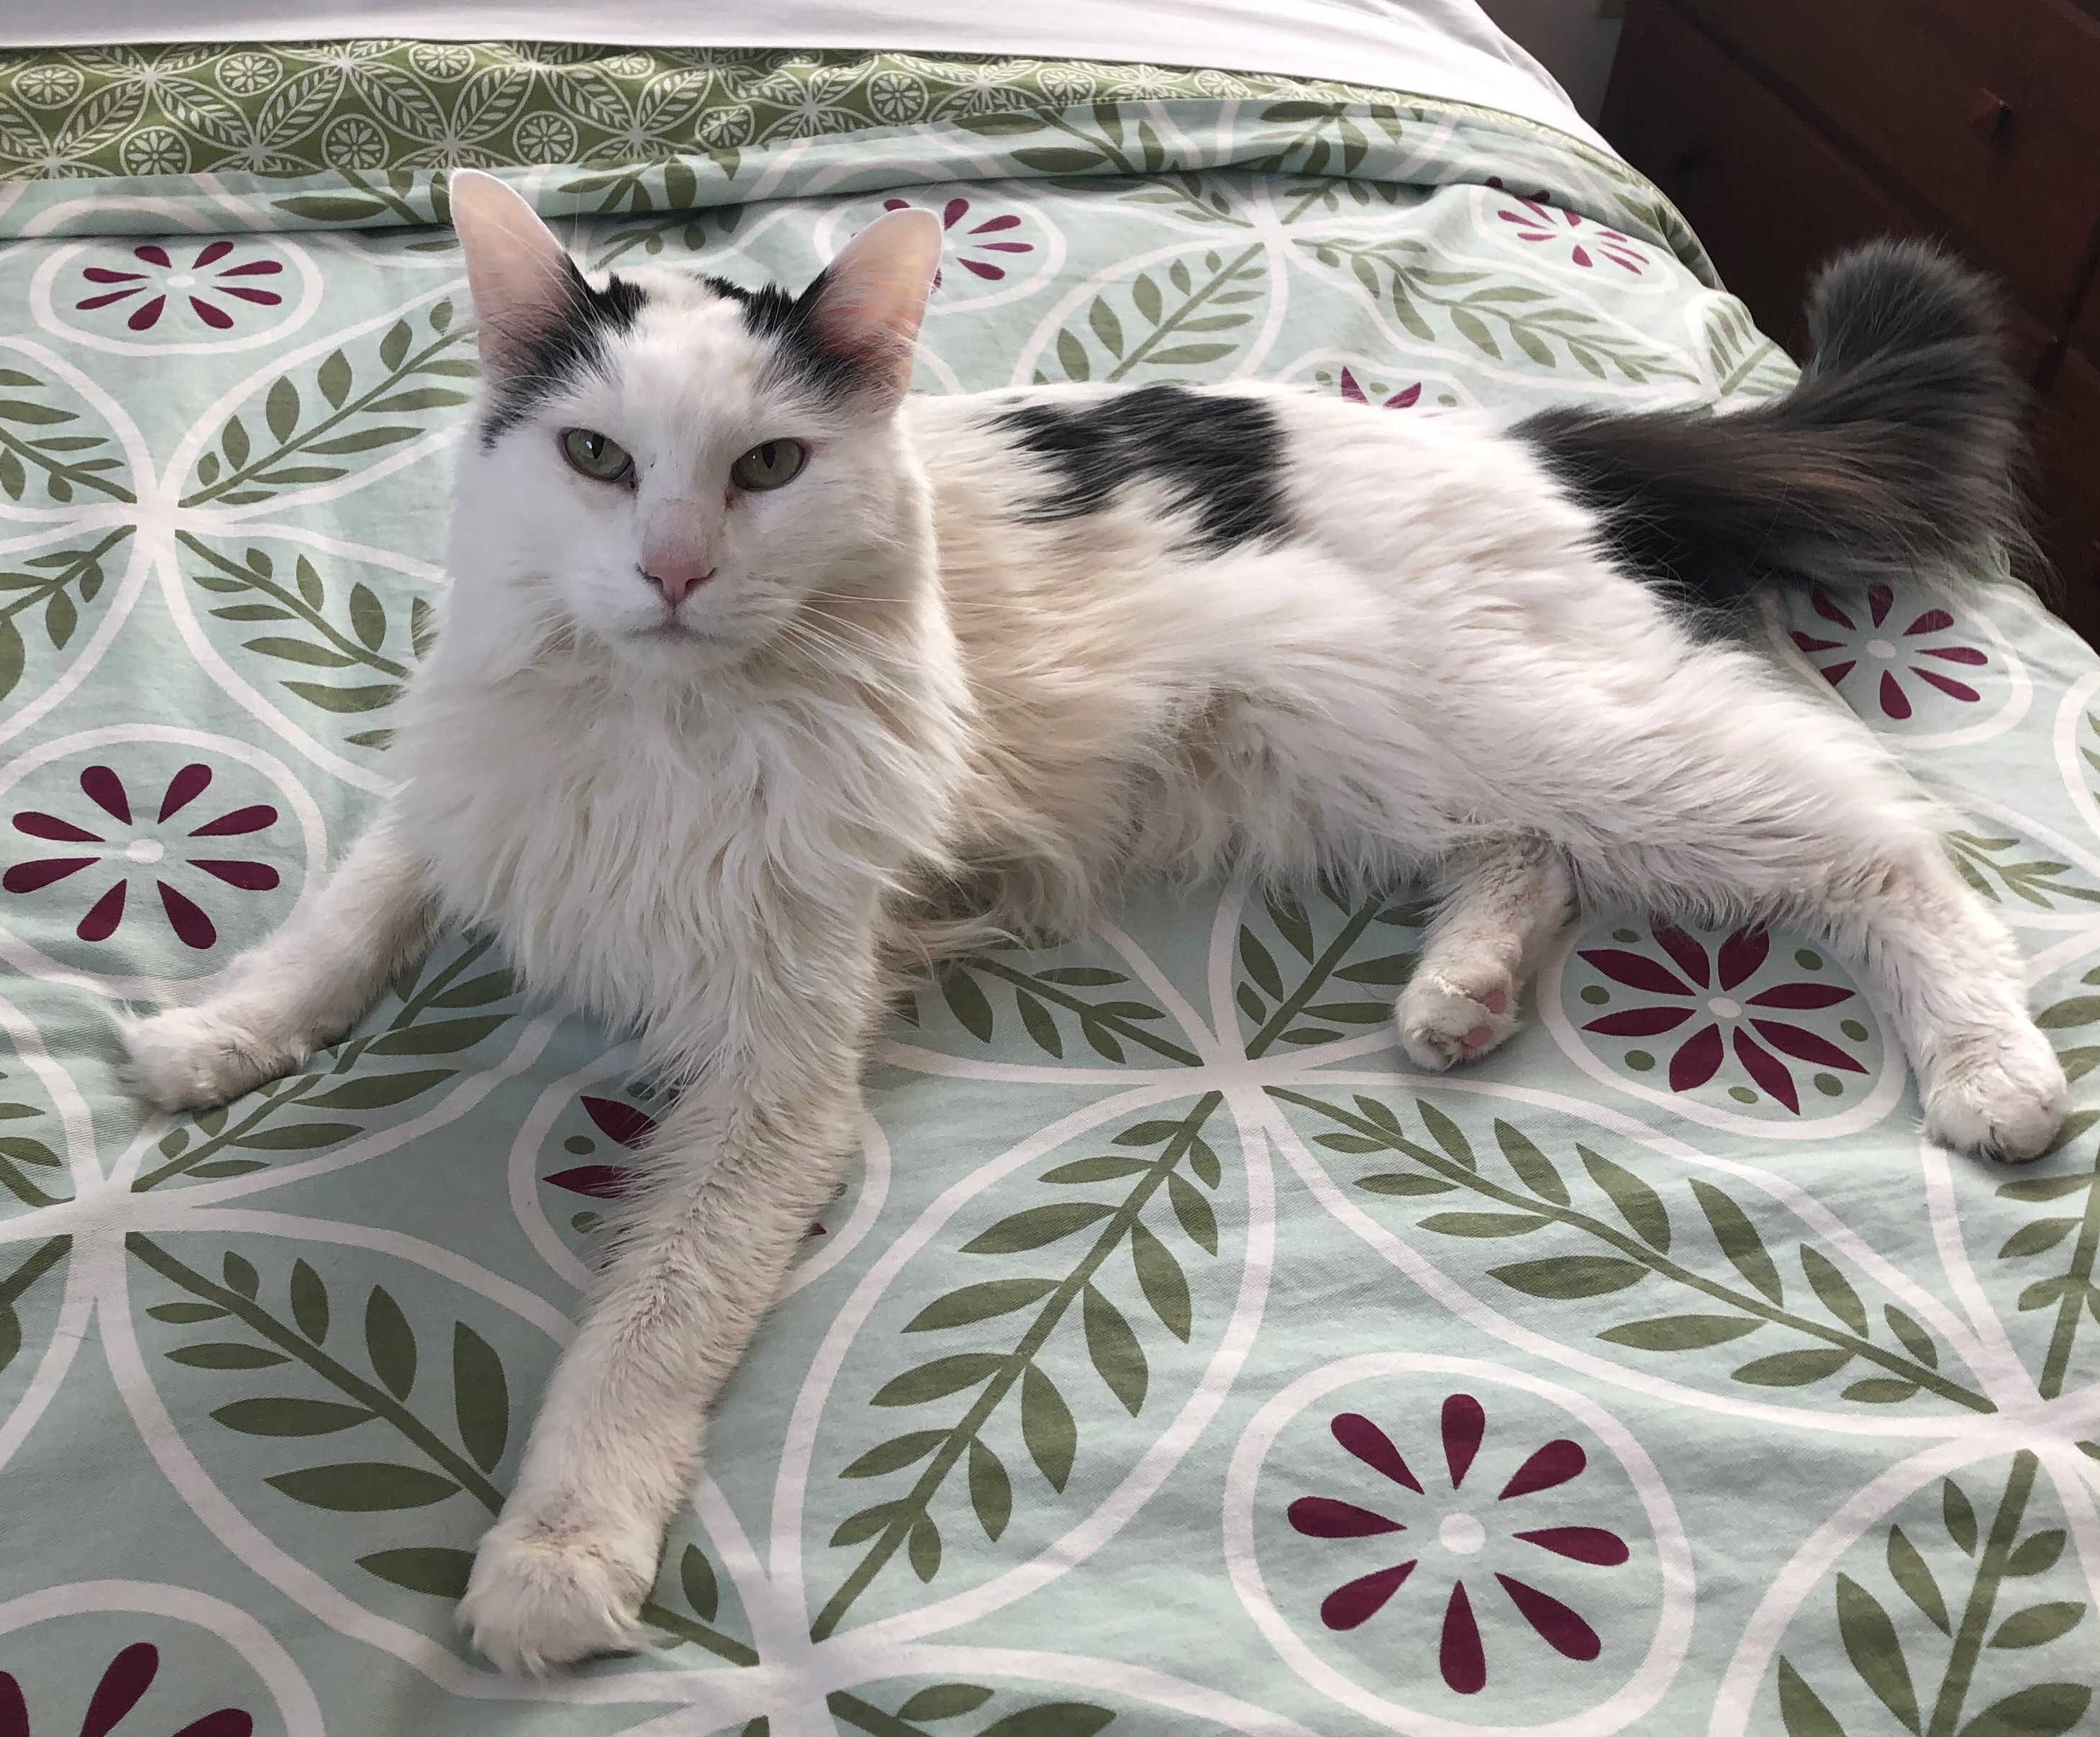 Photo of a fluffy white cat, with a few large black color patches. His name is Meemoo, and he is posing on a bed or sofa that has a flowered pattern on it. He is looking at the camera.